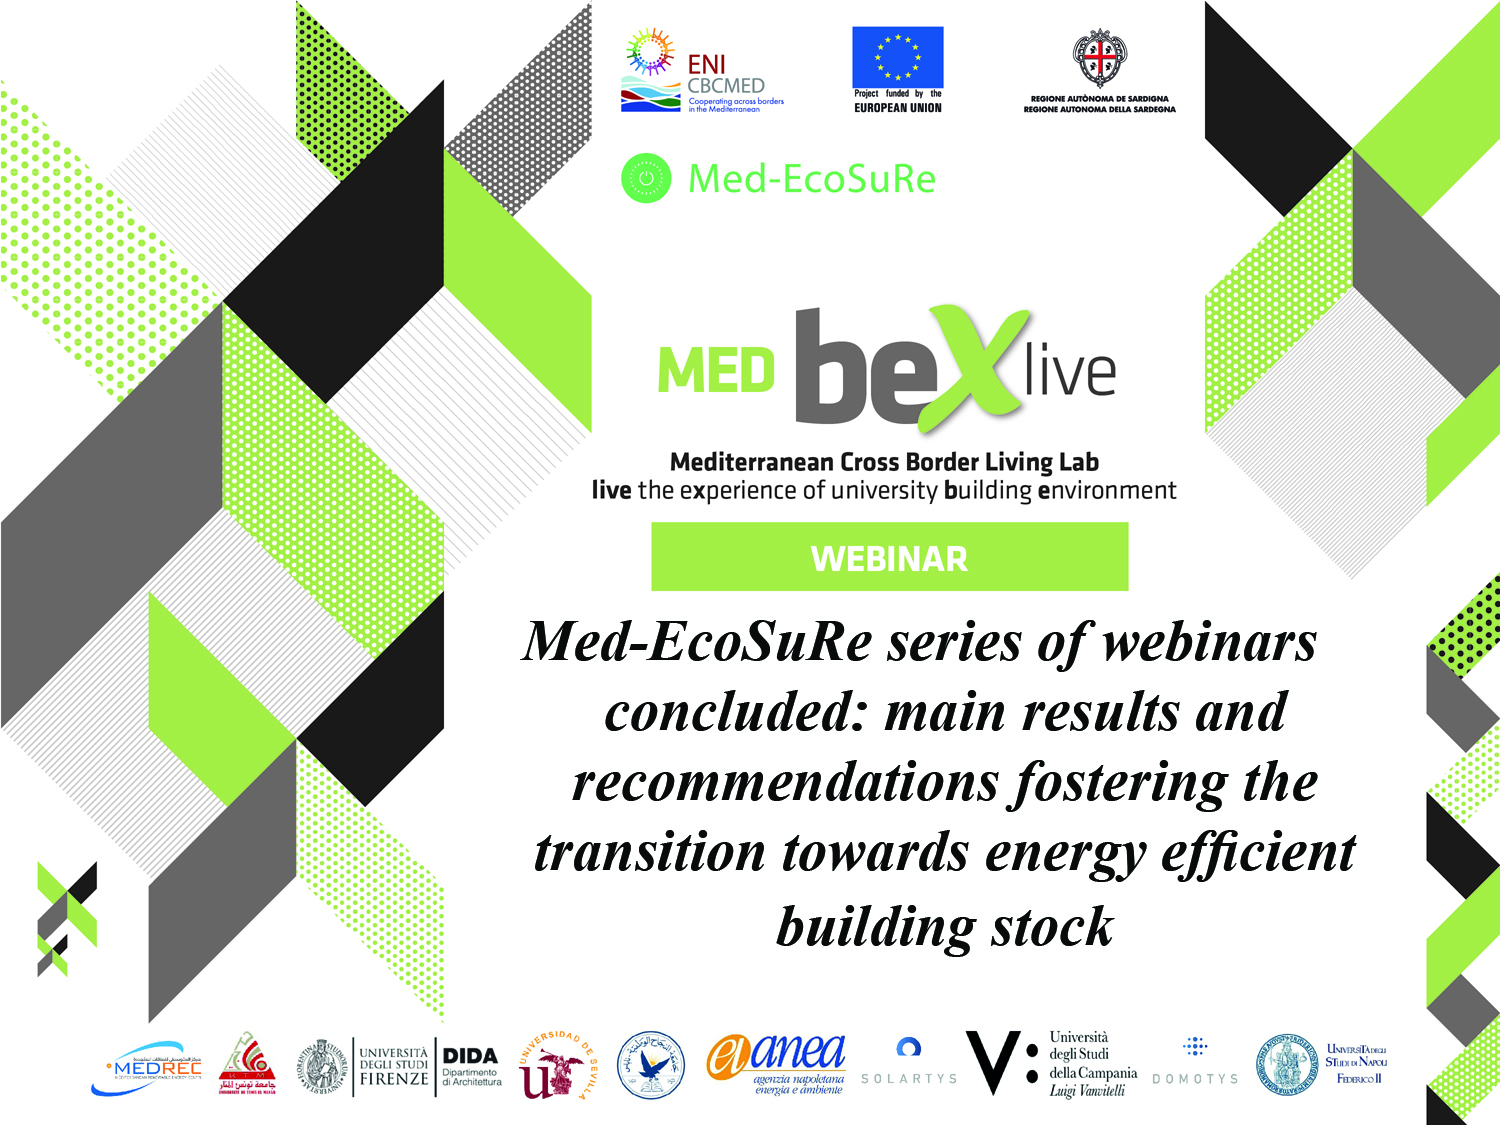 Med-EcoSuRe series of webinars concluded: main results and recommendations fostering effective energy renovation in Mediterranean universities